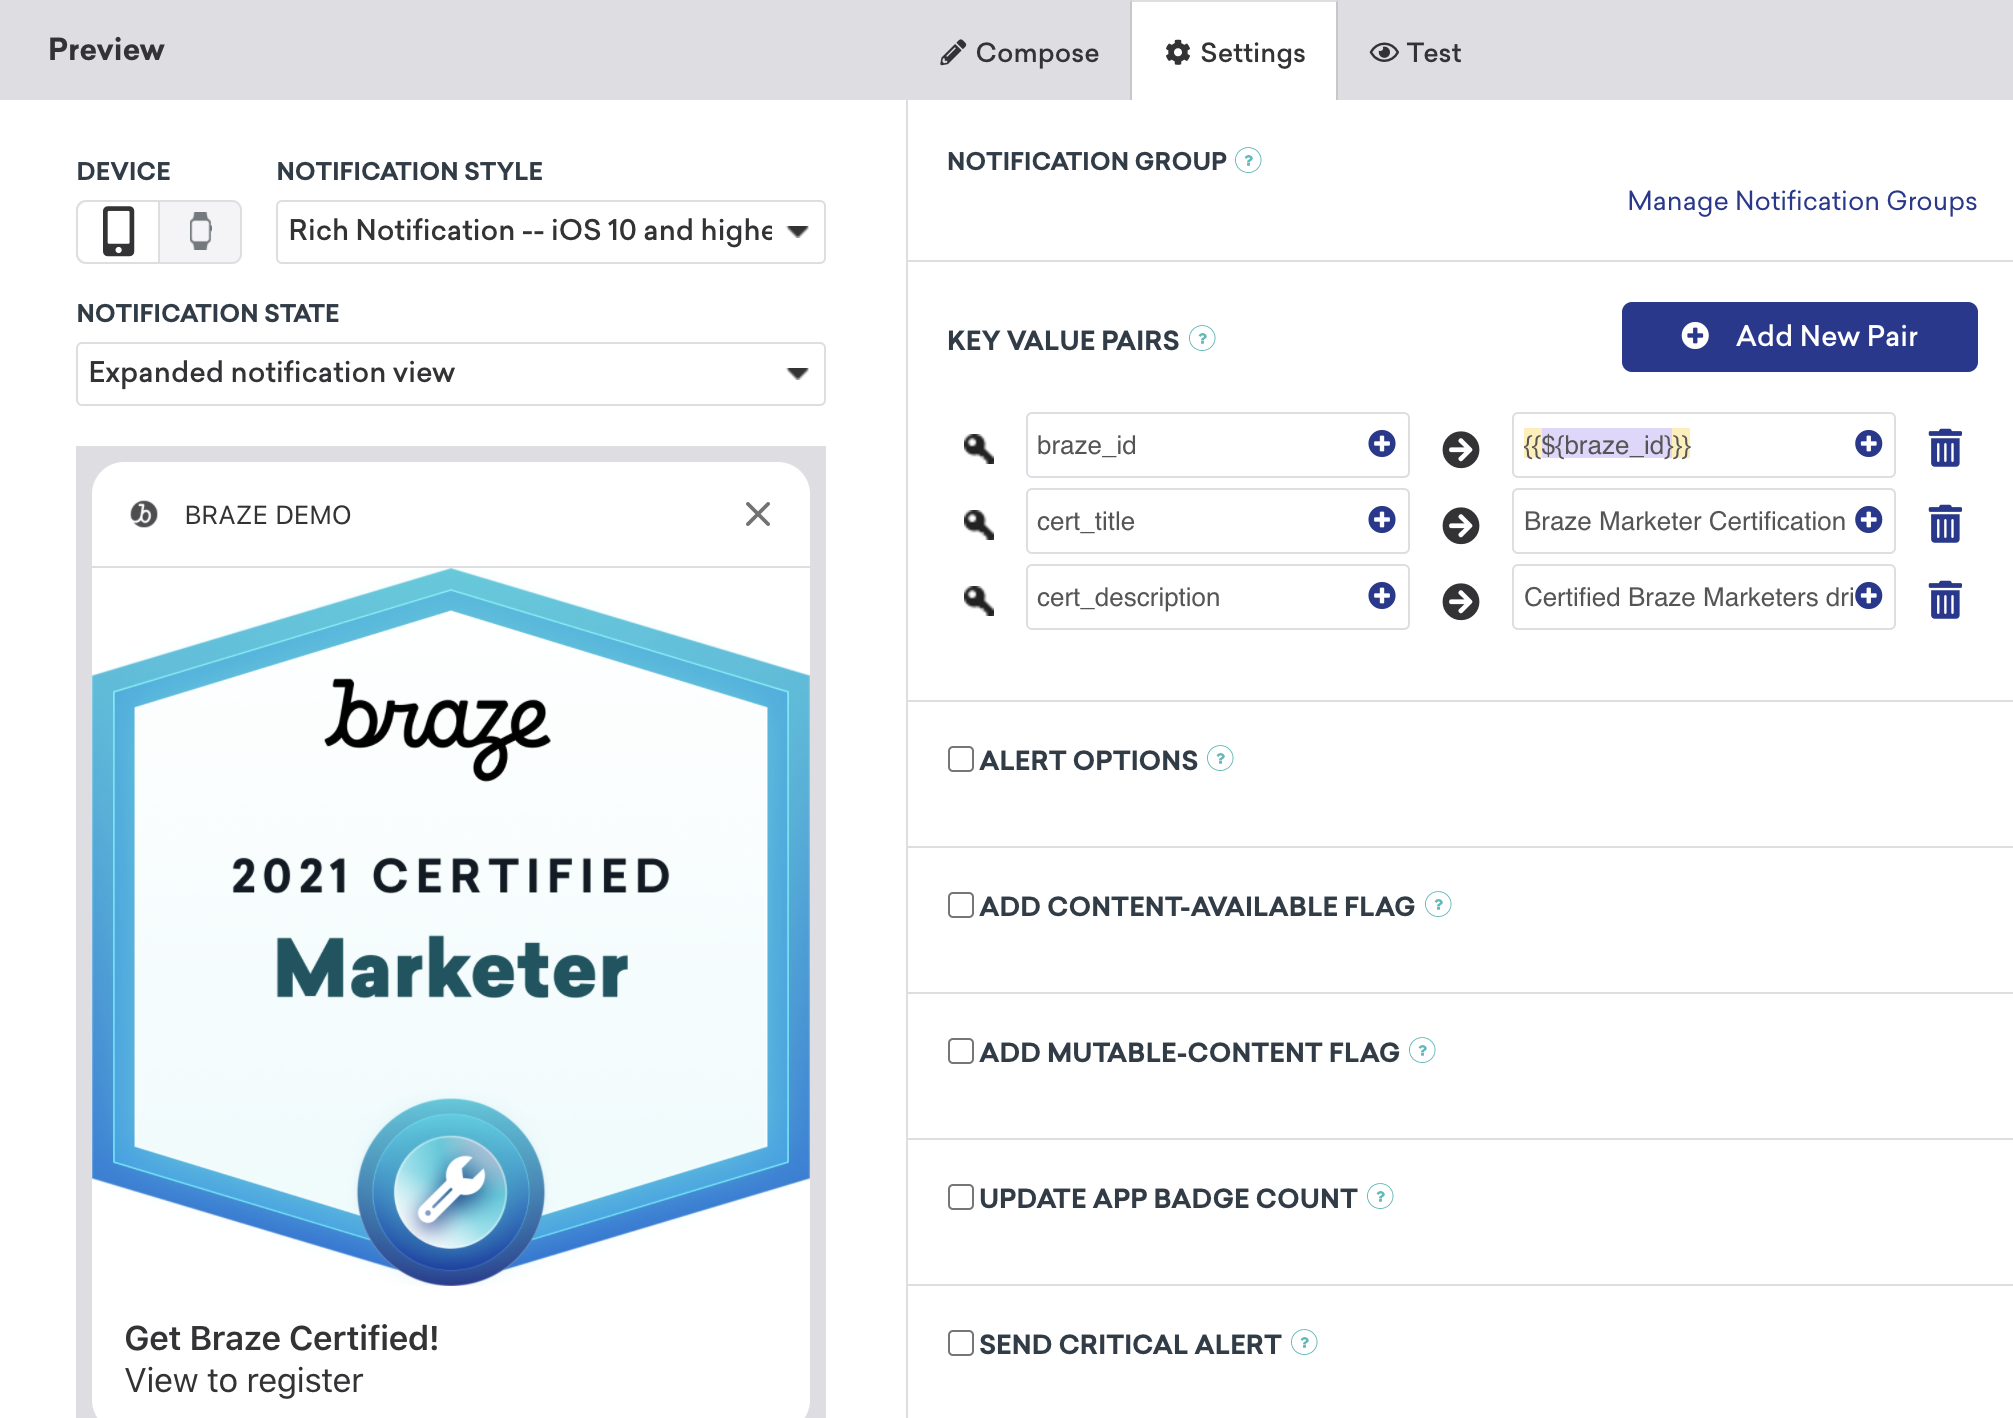 A push message with three sets of key-value pairs. 1. "Braze_id" set as a Liquid call to retrieve Braze ID. 2. "cert_title" set as "Braze Marketer Certificiation". 3. "Cert_description" set as "Certified Braze marketers drive...".